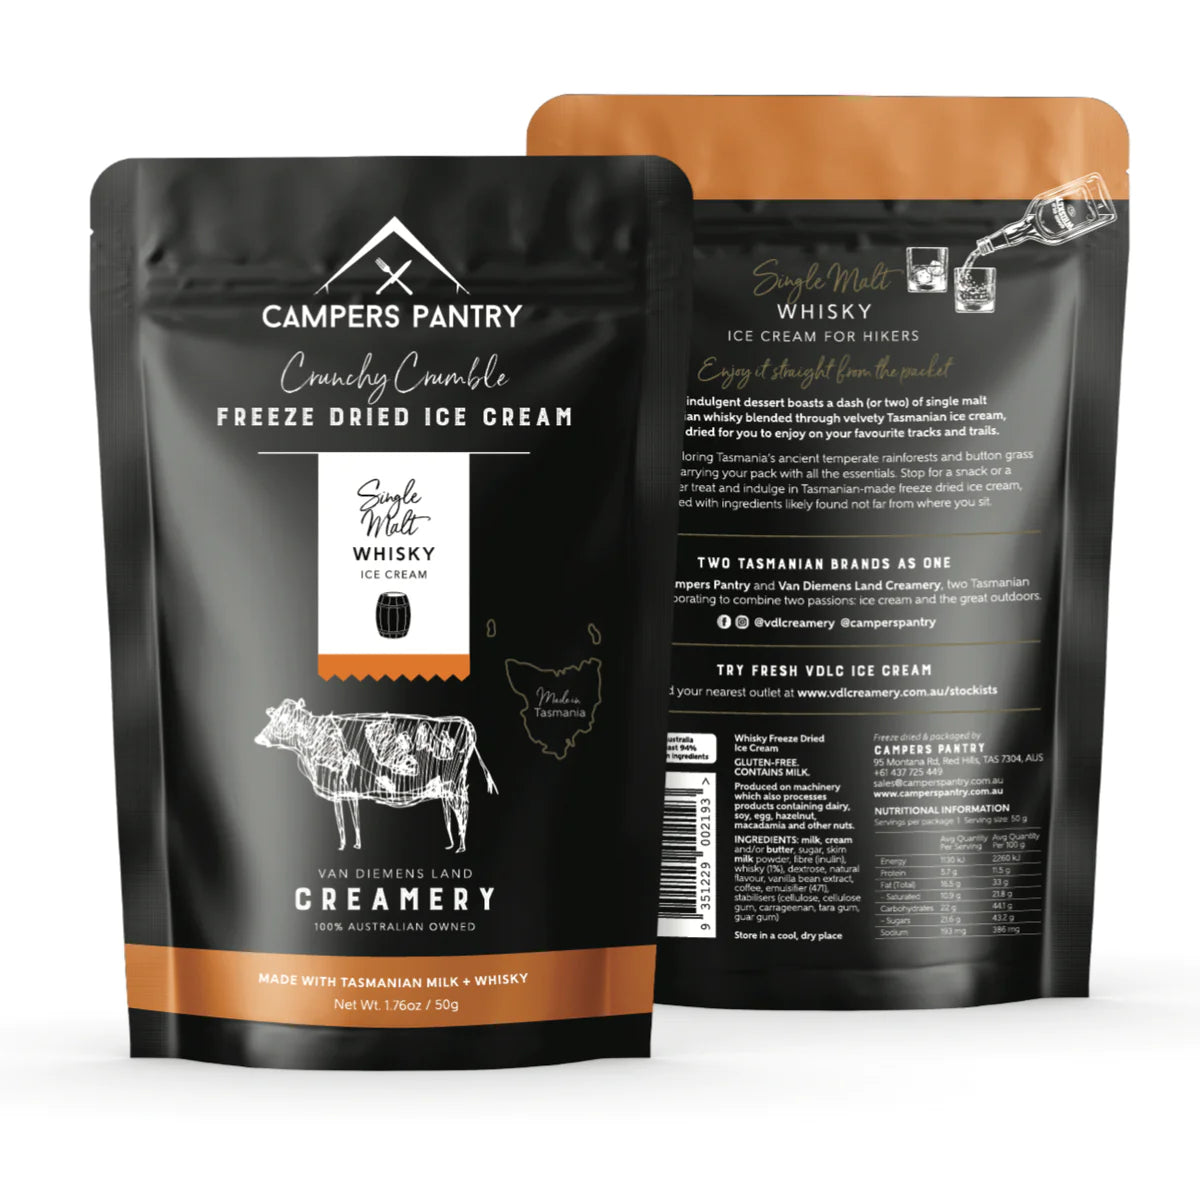 Campers Pantry Freeze Dried Ice Cream - Whisky